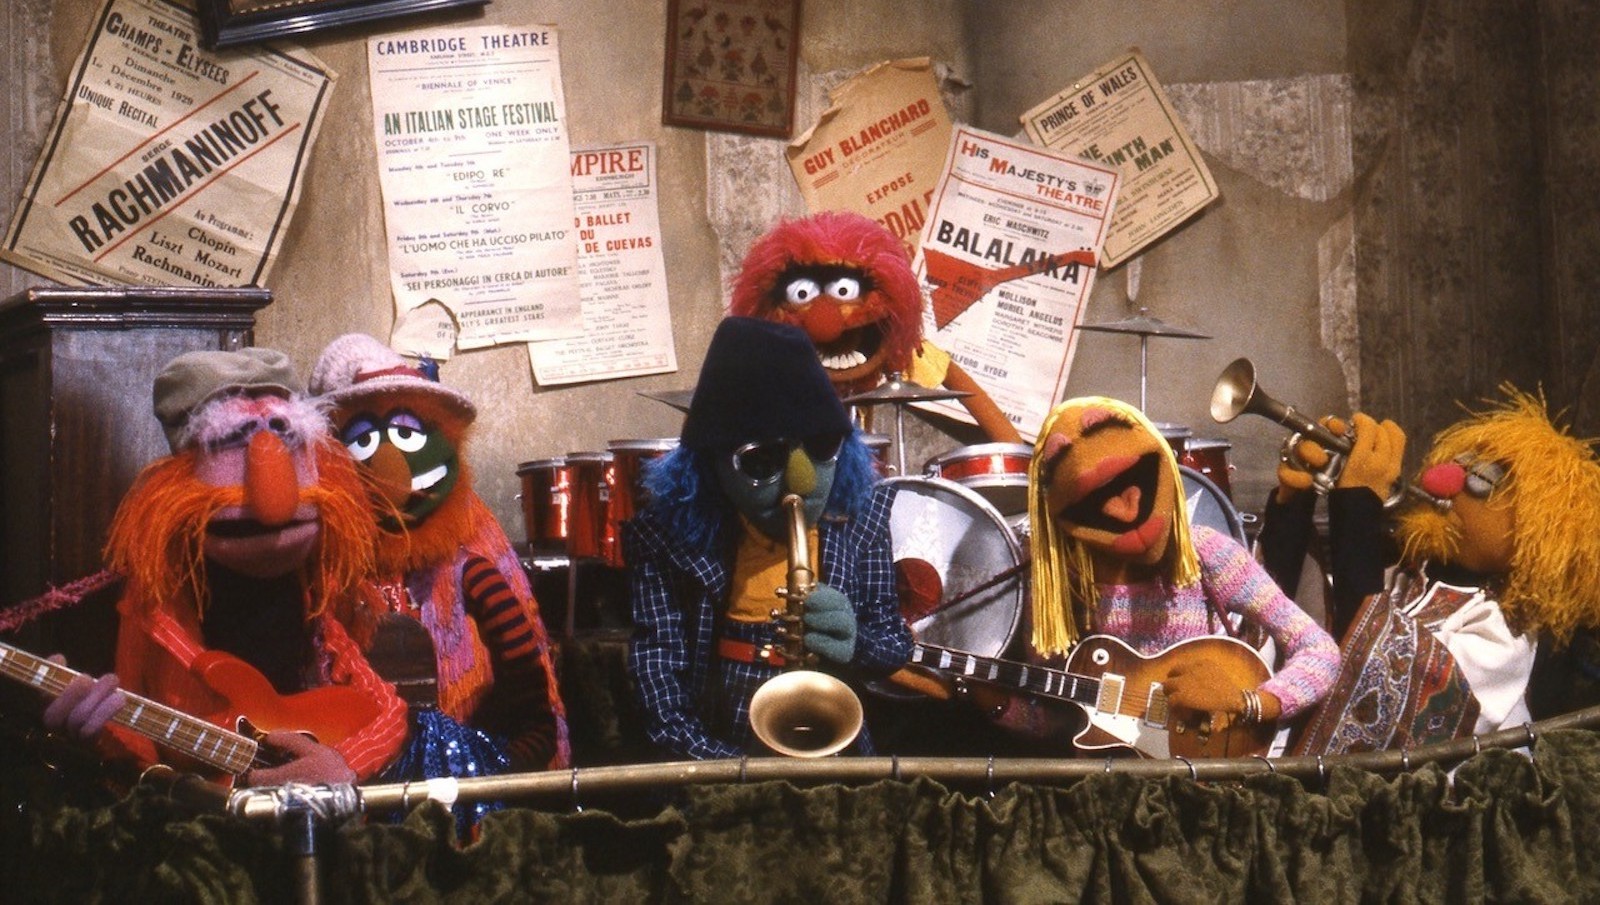 A muppet rock band play instruments—drums, guitars, horns.